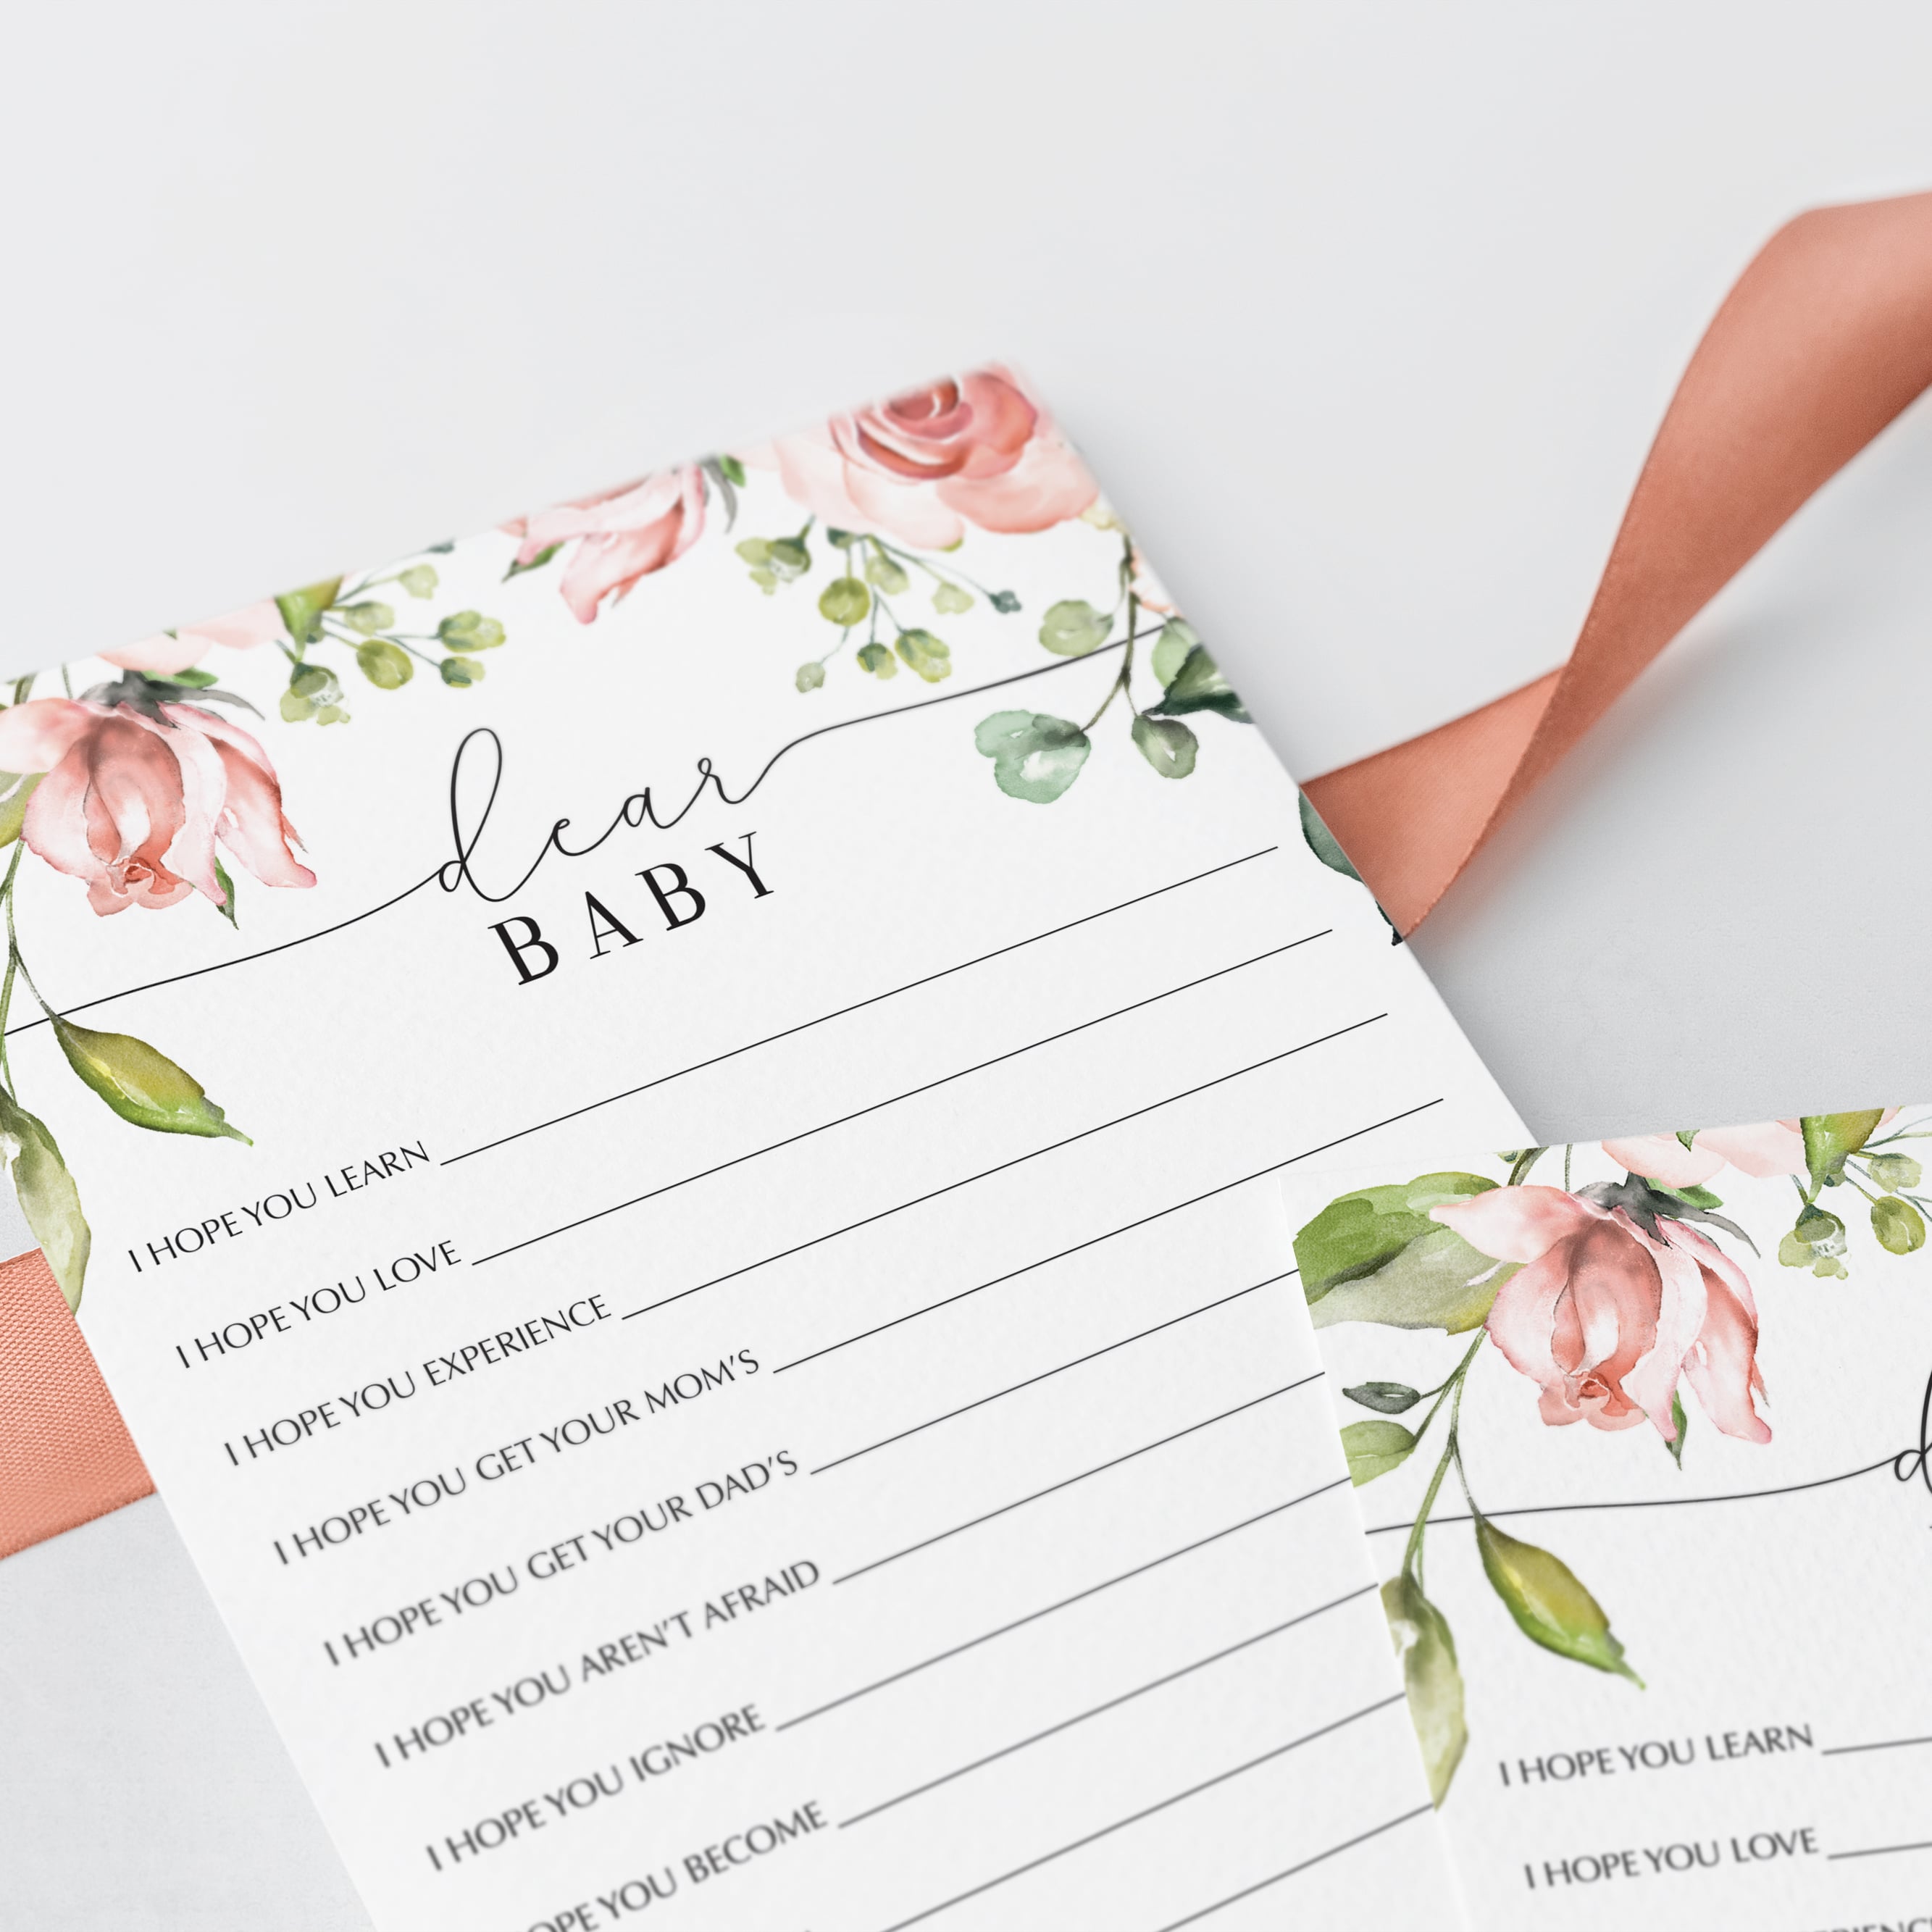 dear baby cards floral theme watercolor by LittleSizzle